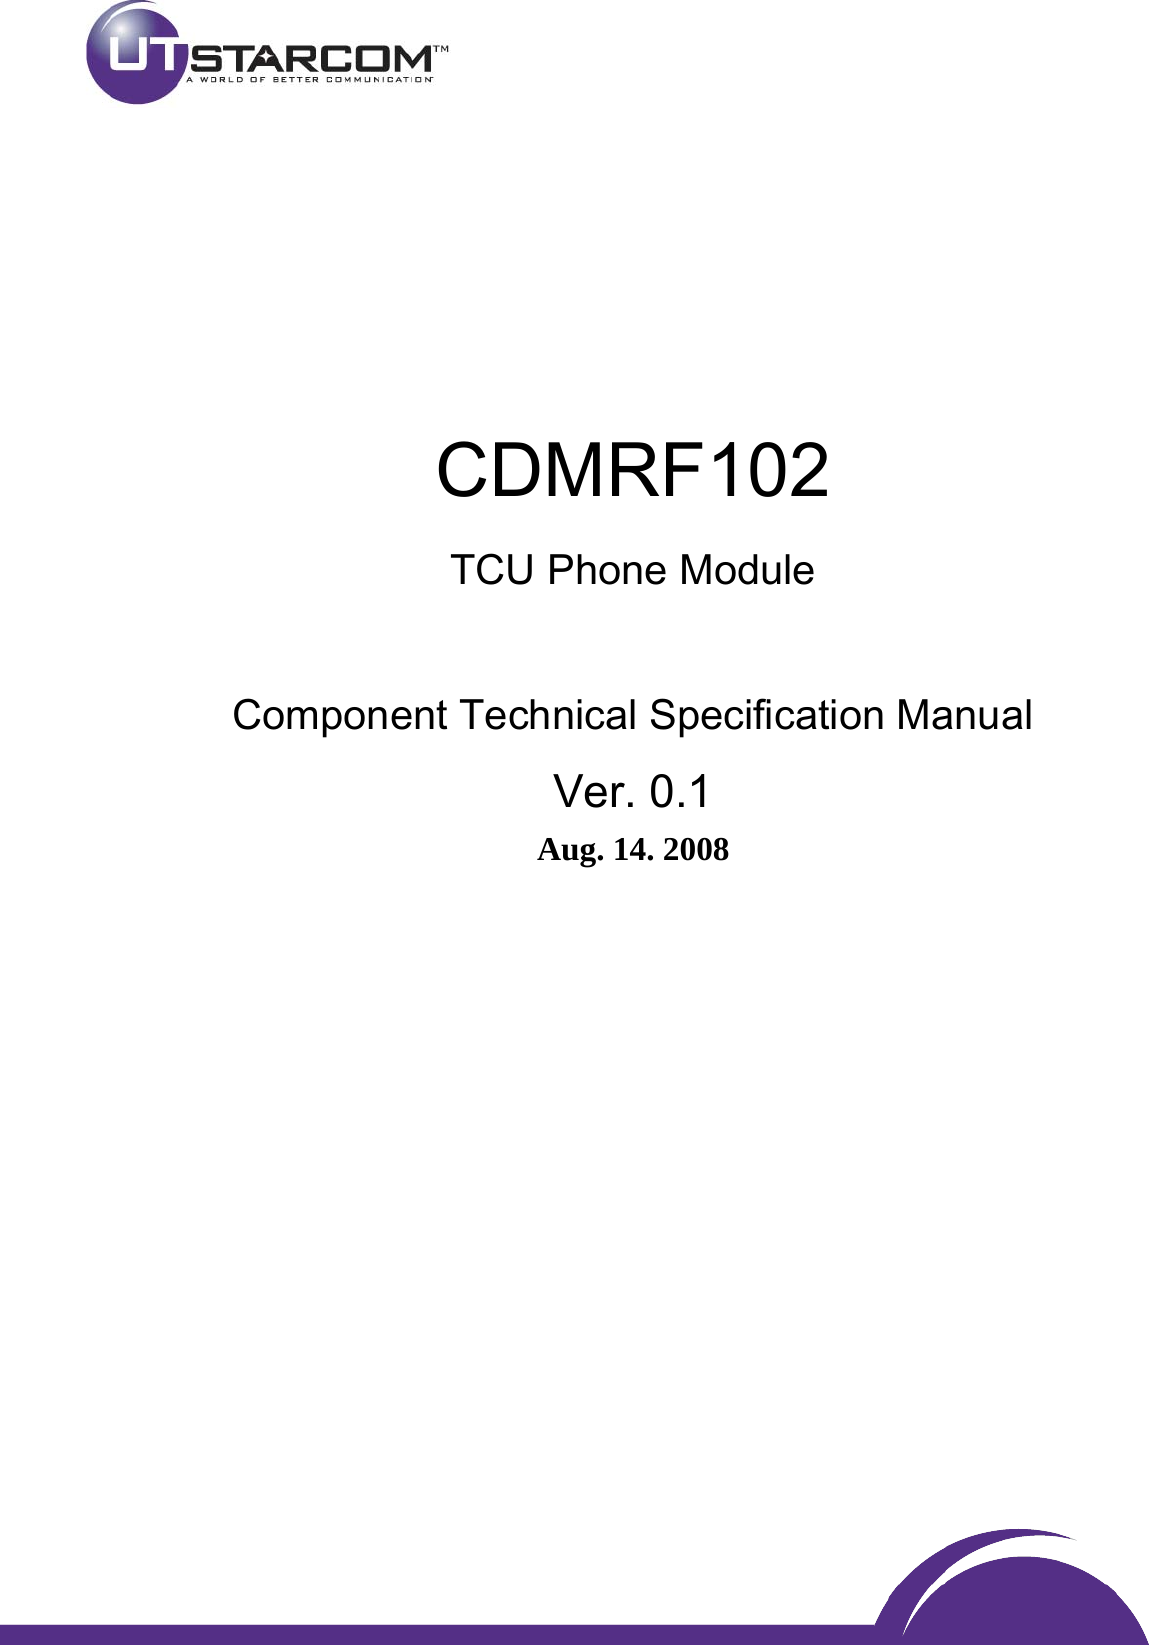          CDMRF102 TCU Phone Module  Component Technical Specification Manual Ver. 0.1 Aug. 14. 2008                       